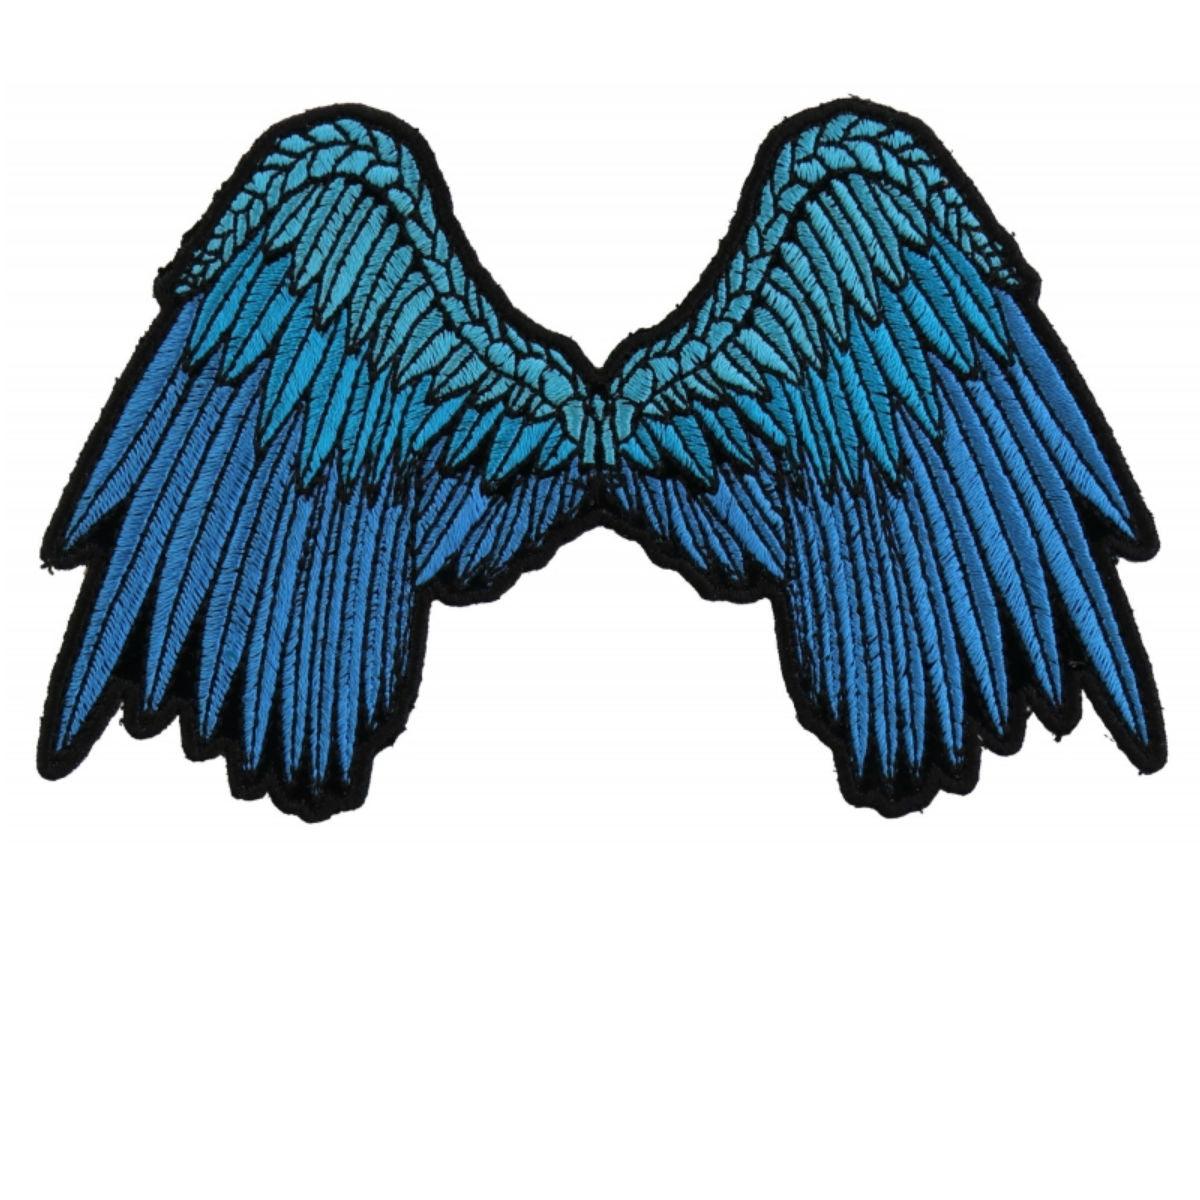 Daniel Smart Small Beautiful Angel Wings Blue Patch, 5 x 3 inches - American Legend Rider